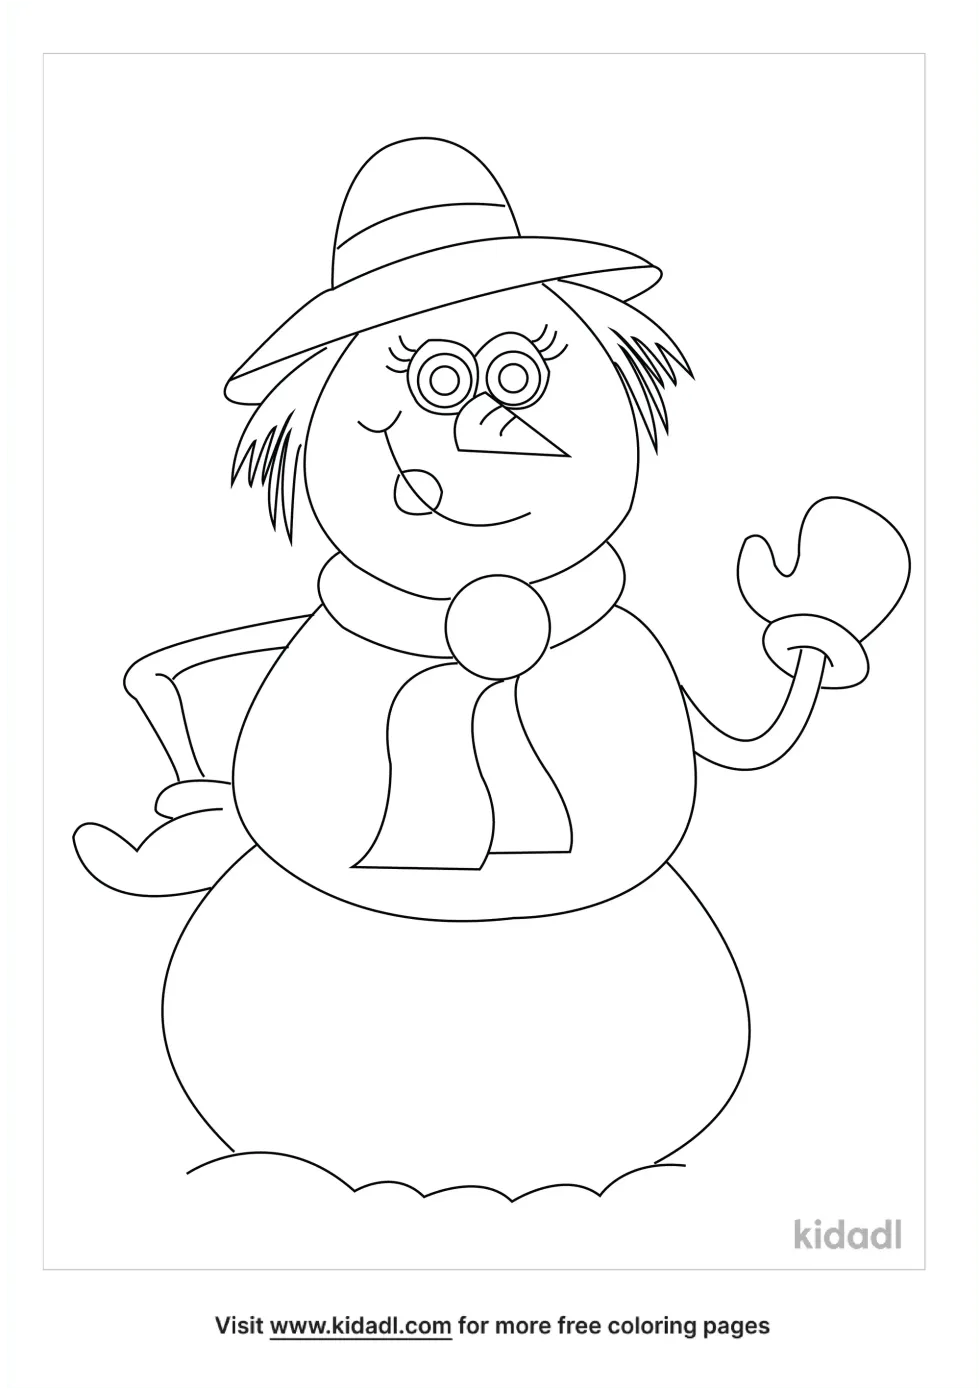 Snow Woman Coloring Page